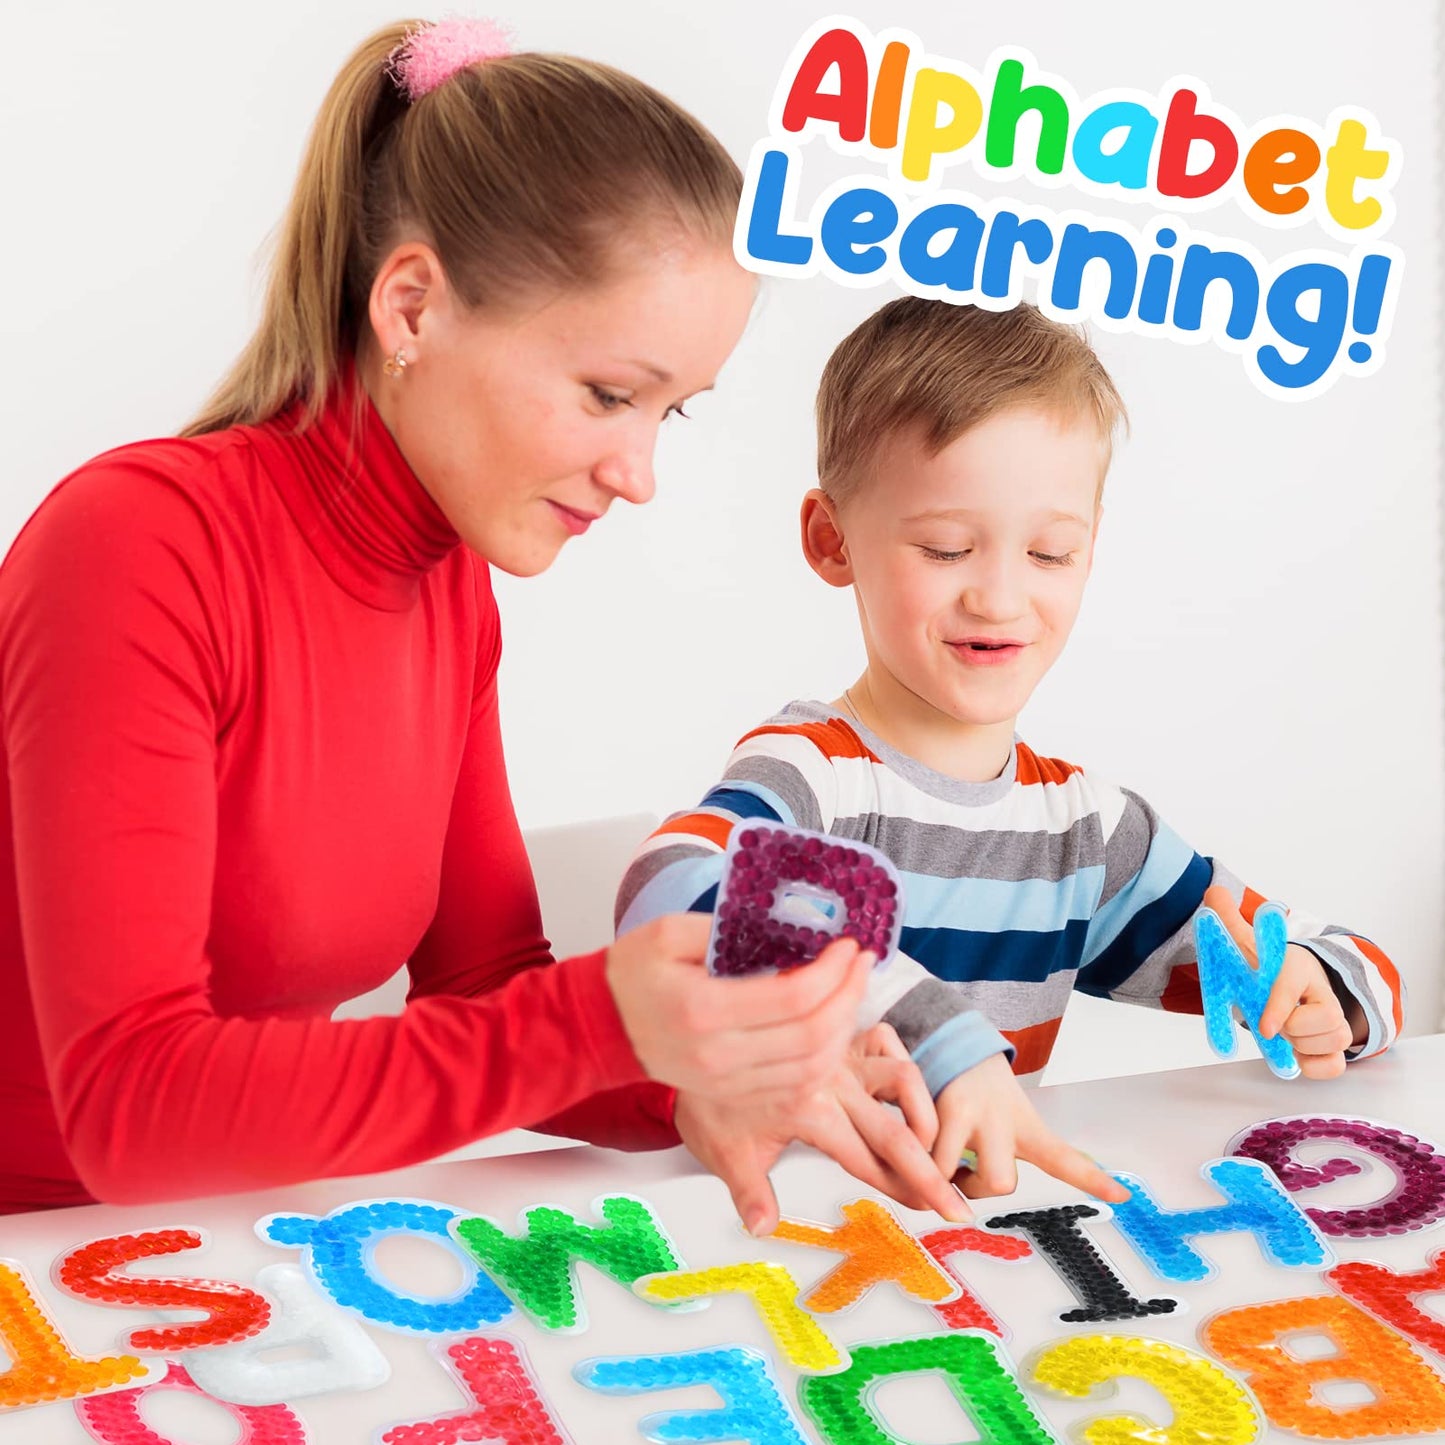 LESONG Alphabet Letters Sensory Toys for Kids: ABC Learning Educational Montessori Toys for Preschool Toddlers 3 4 5 6 Years Old, Water Beads Fidget Sensory Toys for Autistic Children Anxiety Relief